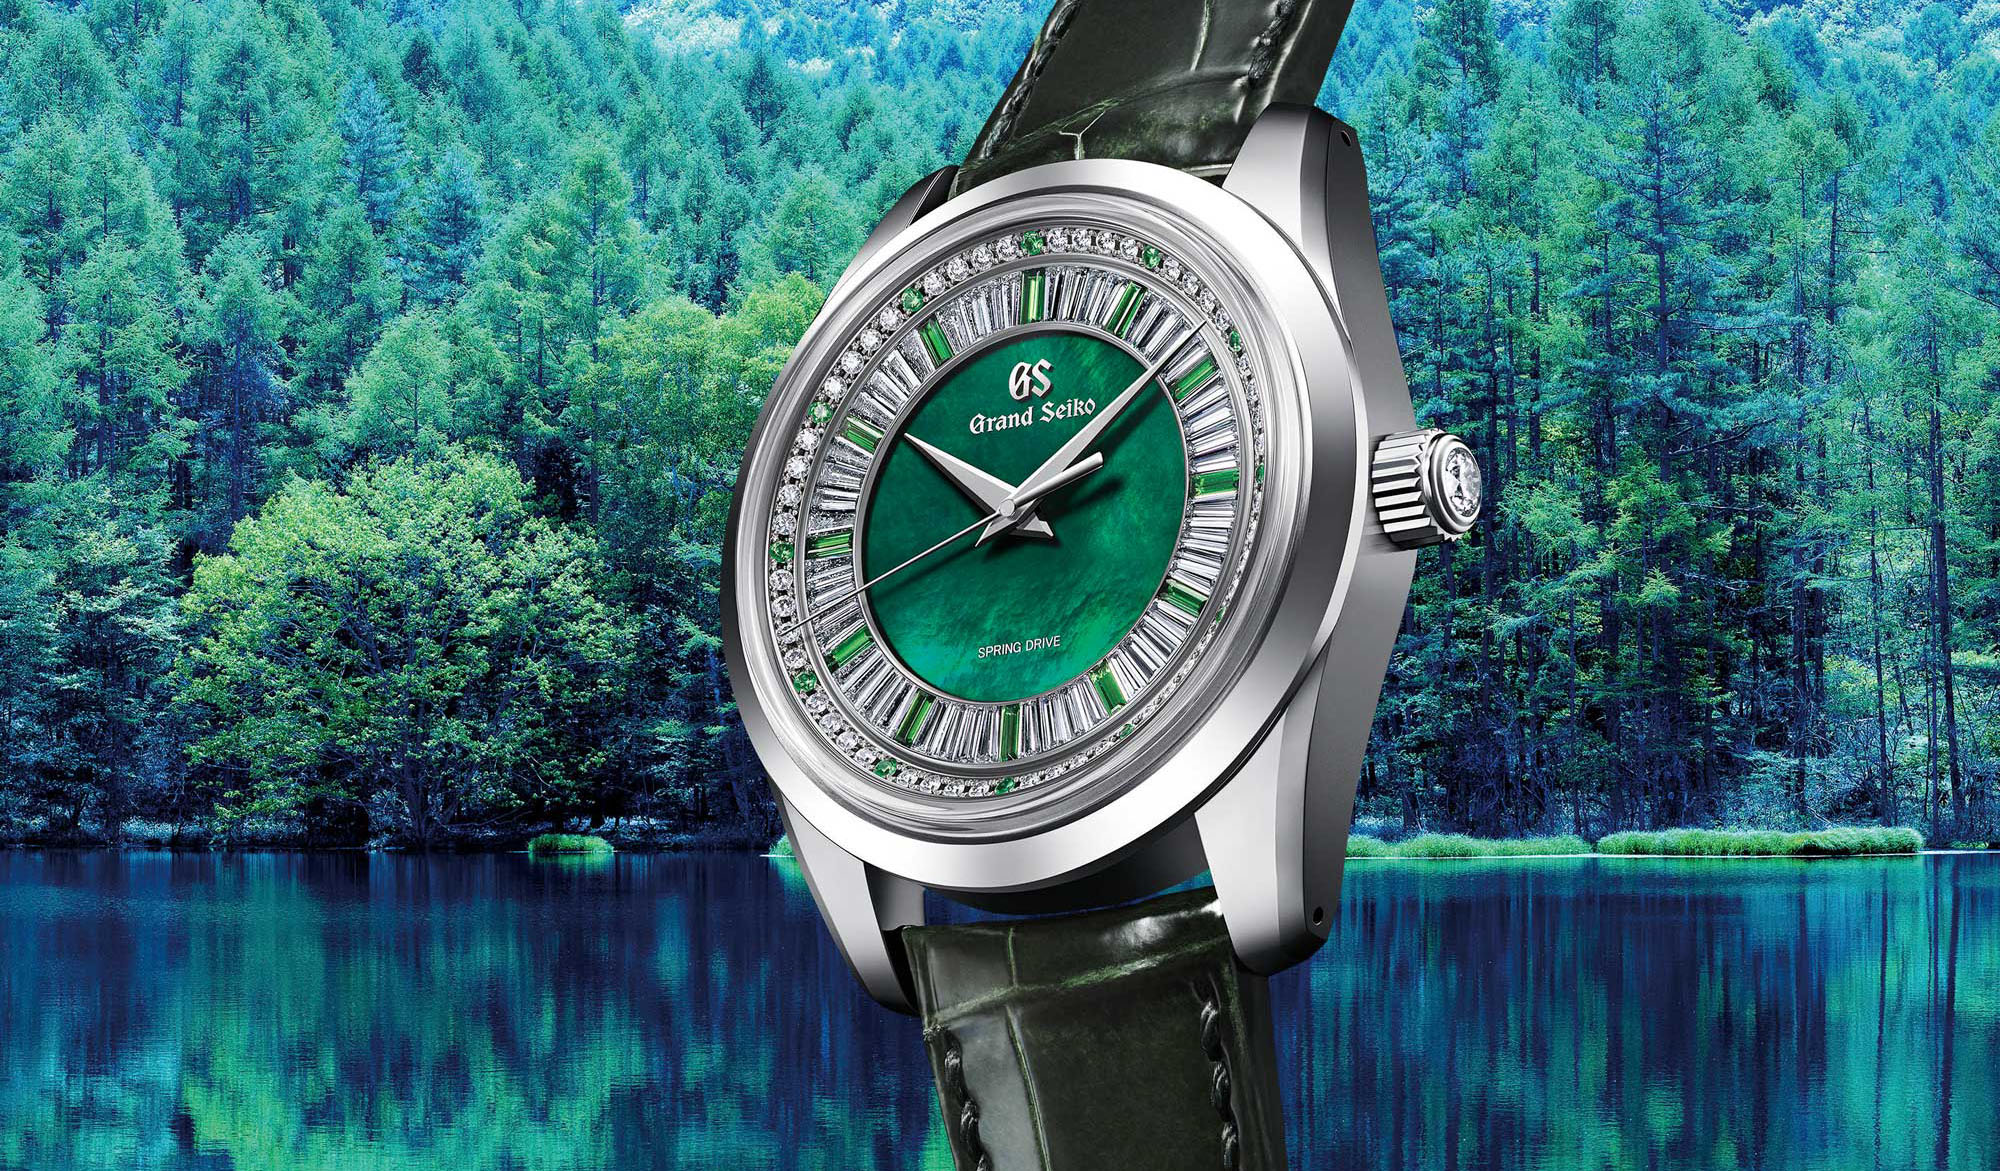 SBGD207 wristwatch against forest background